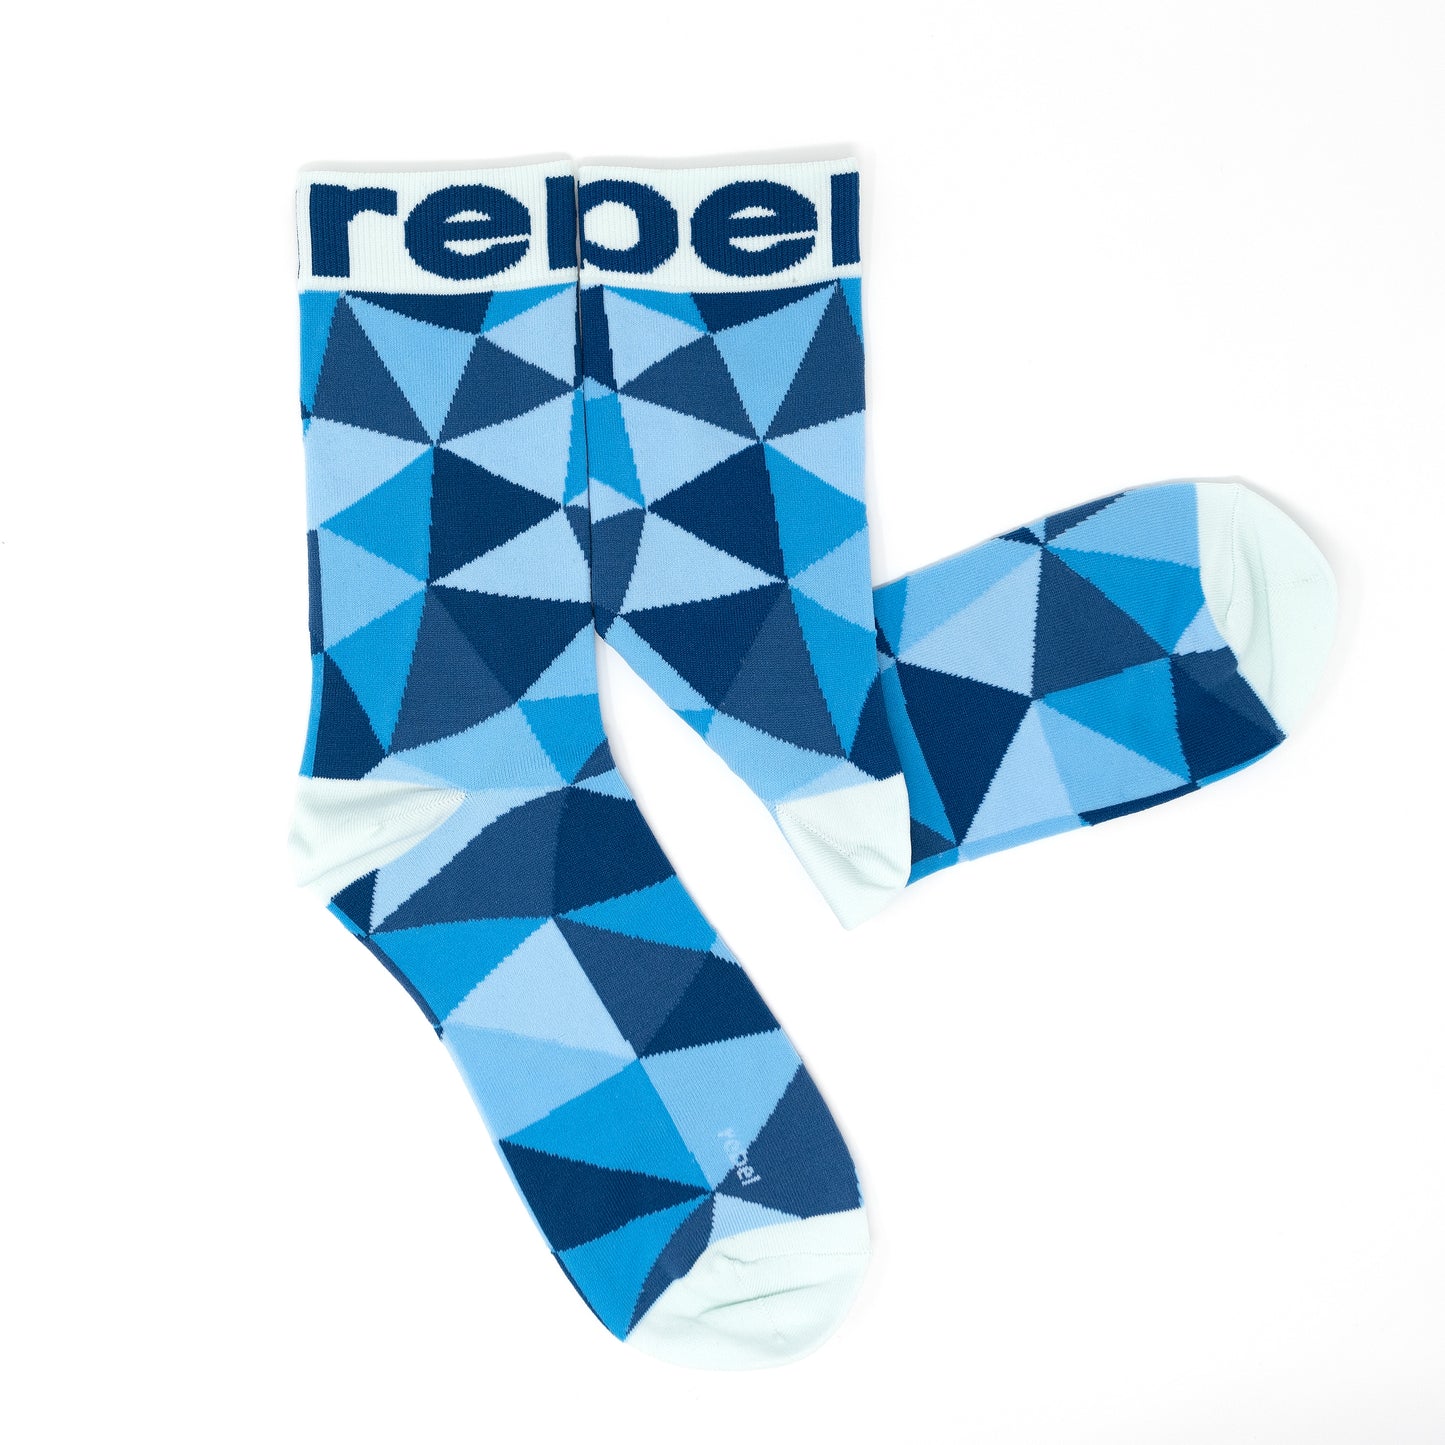 Stand out from the crowd with Rebel Fashion's Dress Blue Socks!